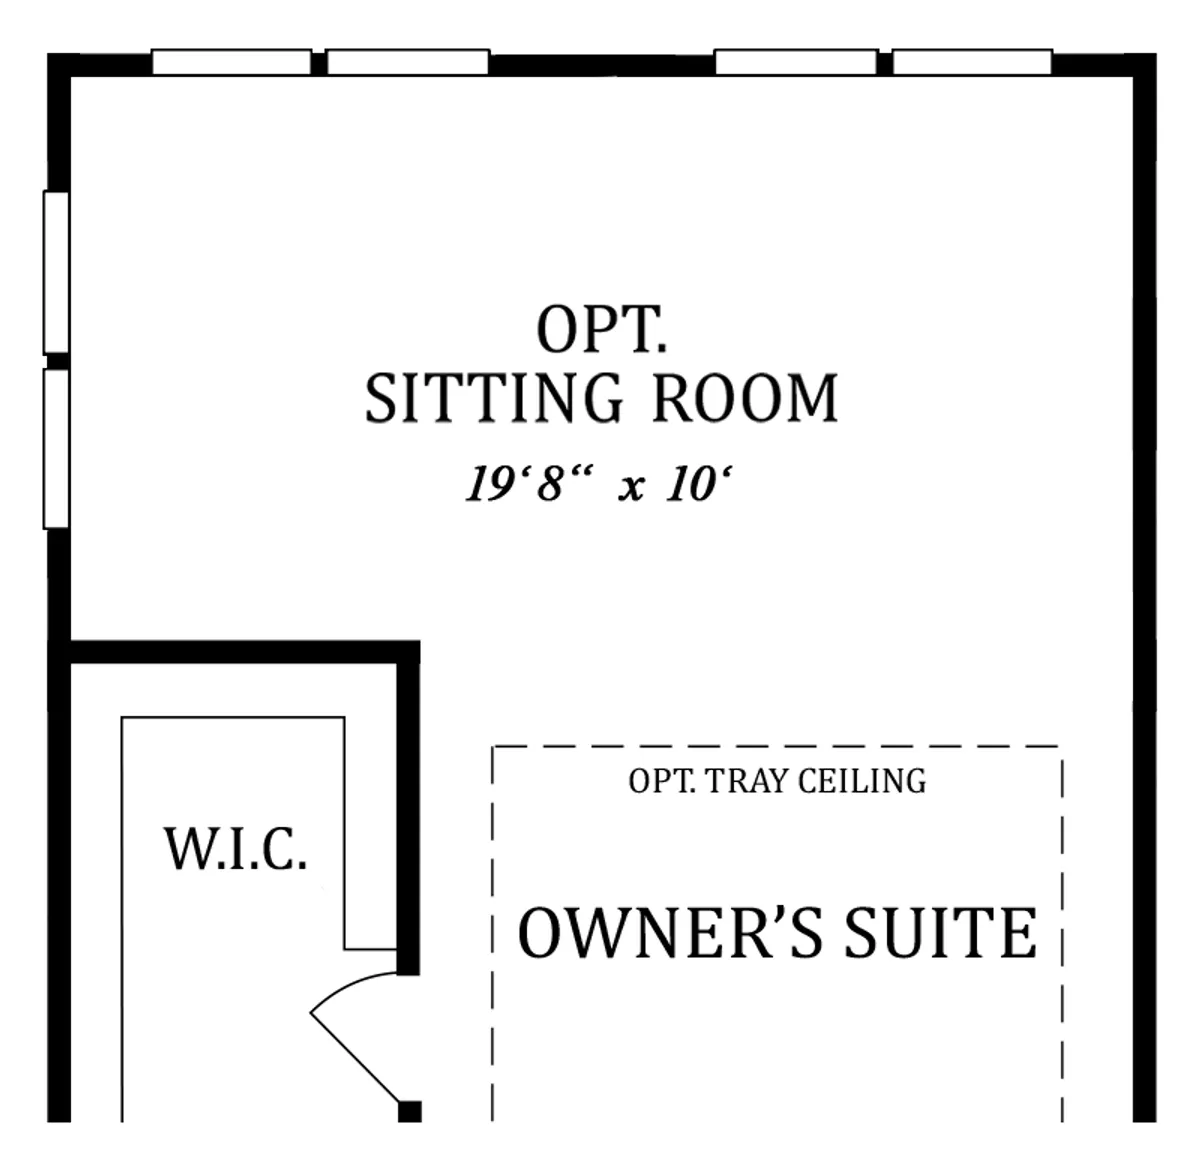 Second Floor | Optional Sitting Room - with Morning Room Add